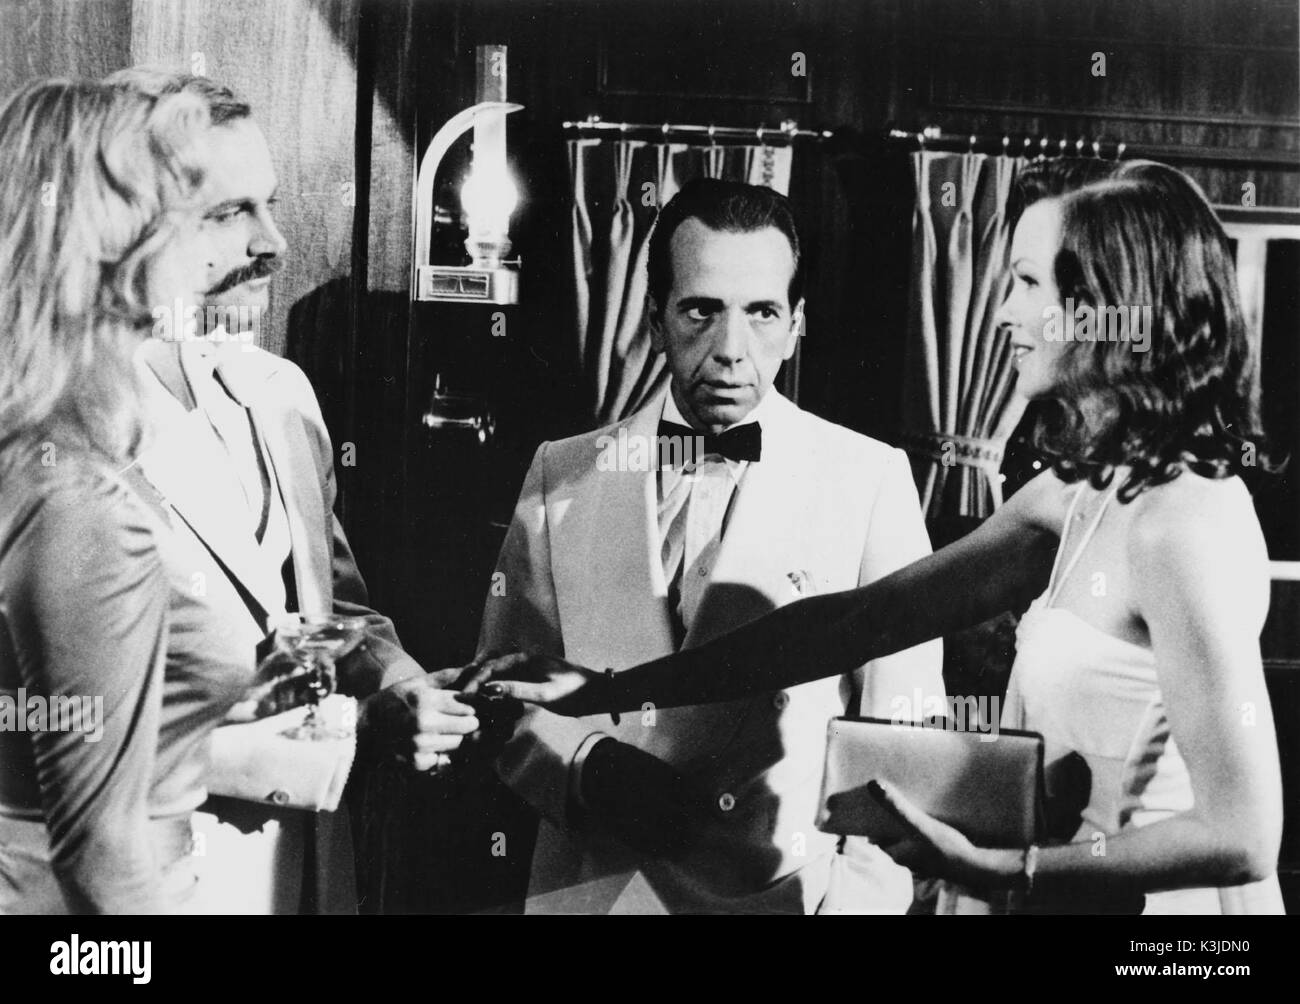 THE MAN WITH BOGART'S FACE [US 1980] MICHELLE PHILLIPS, FRANCO NERO, ROBERT SACCHI, SYBIL DANNING     Date: 1980 Stock Photo